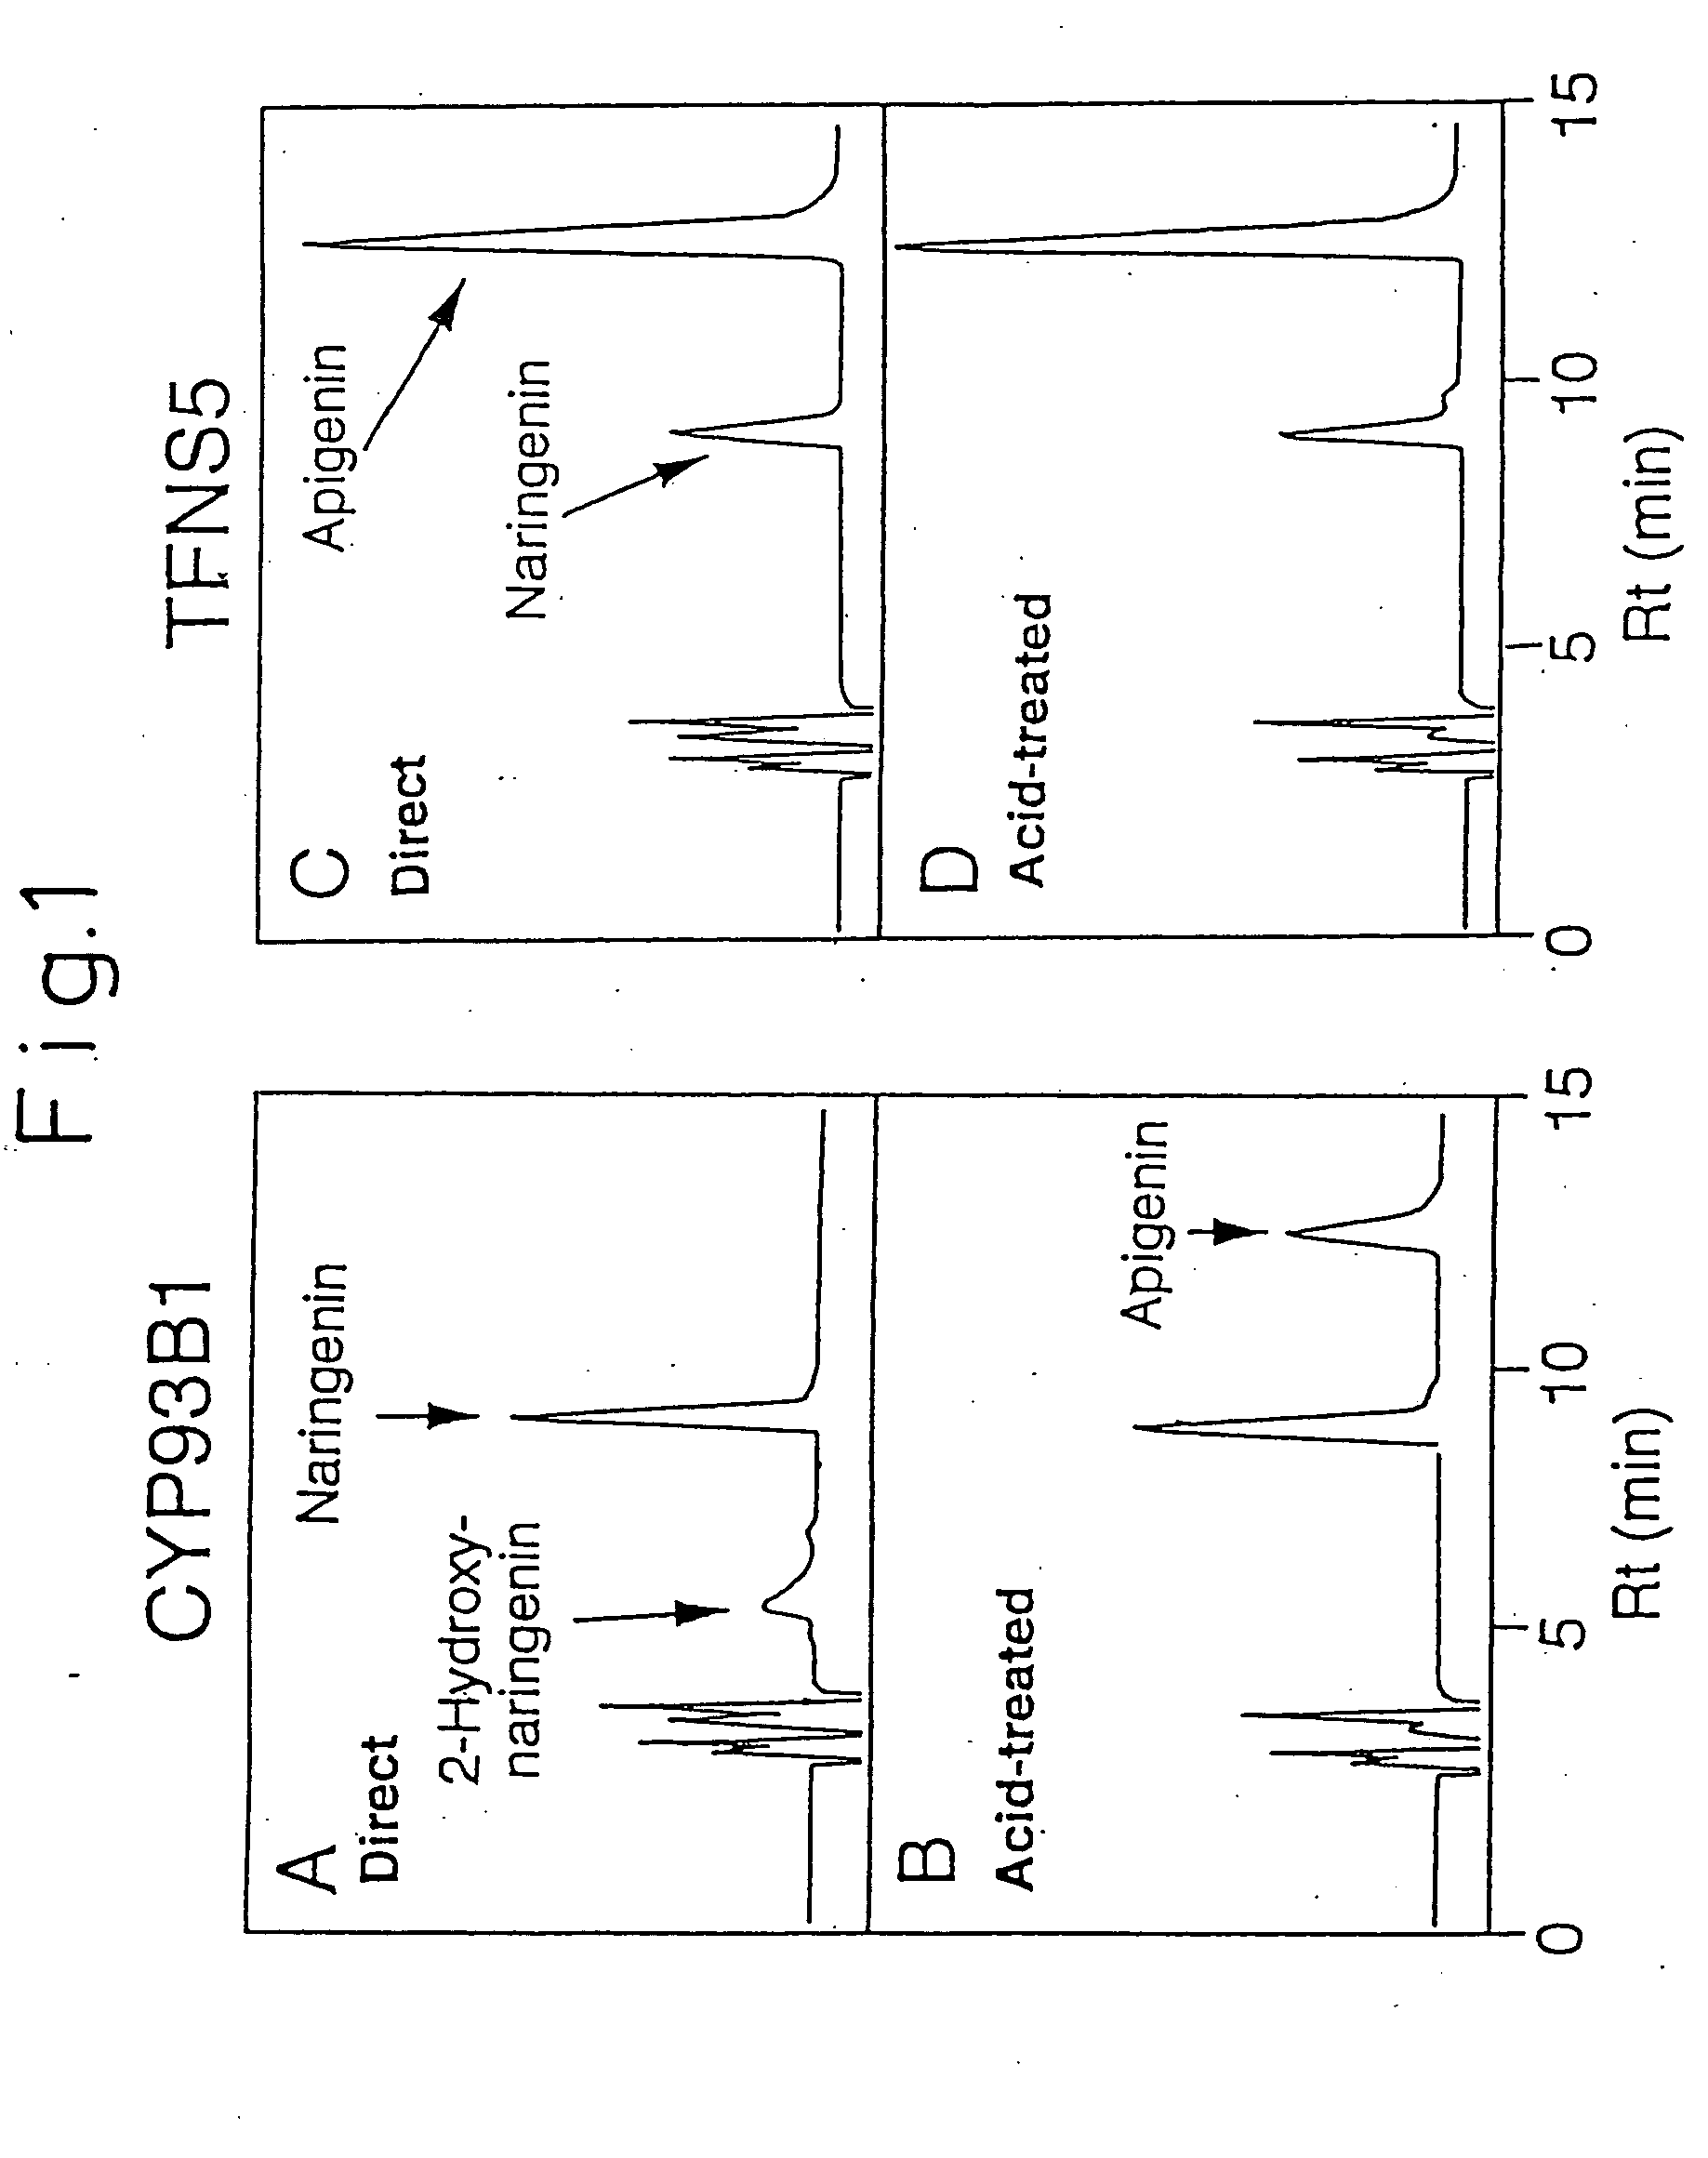 DNAs coding for flavone synthases, methods of using flavone synthase DNAs, and plants, flowers, and vectors containing flavone synthase DNAs